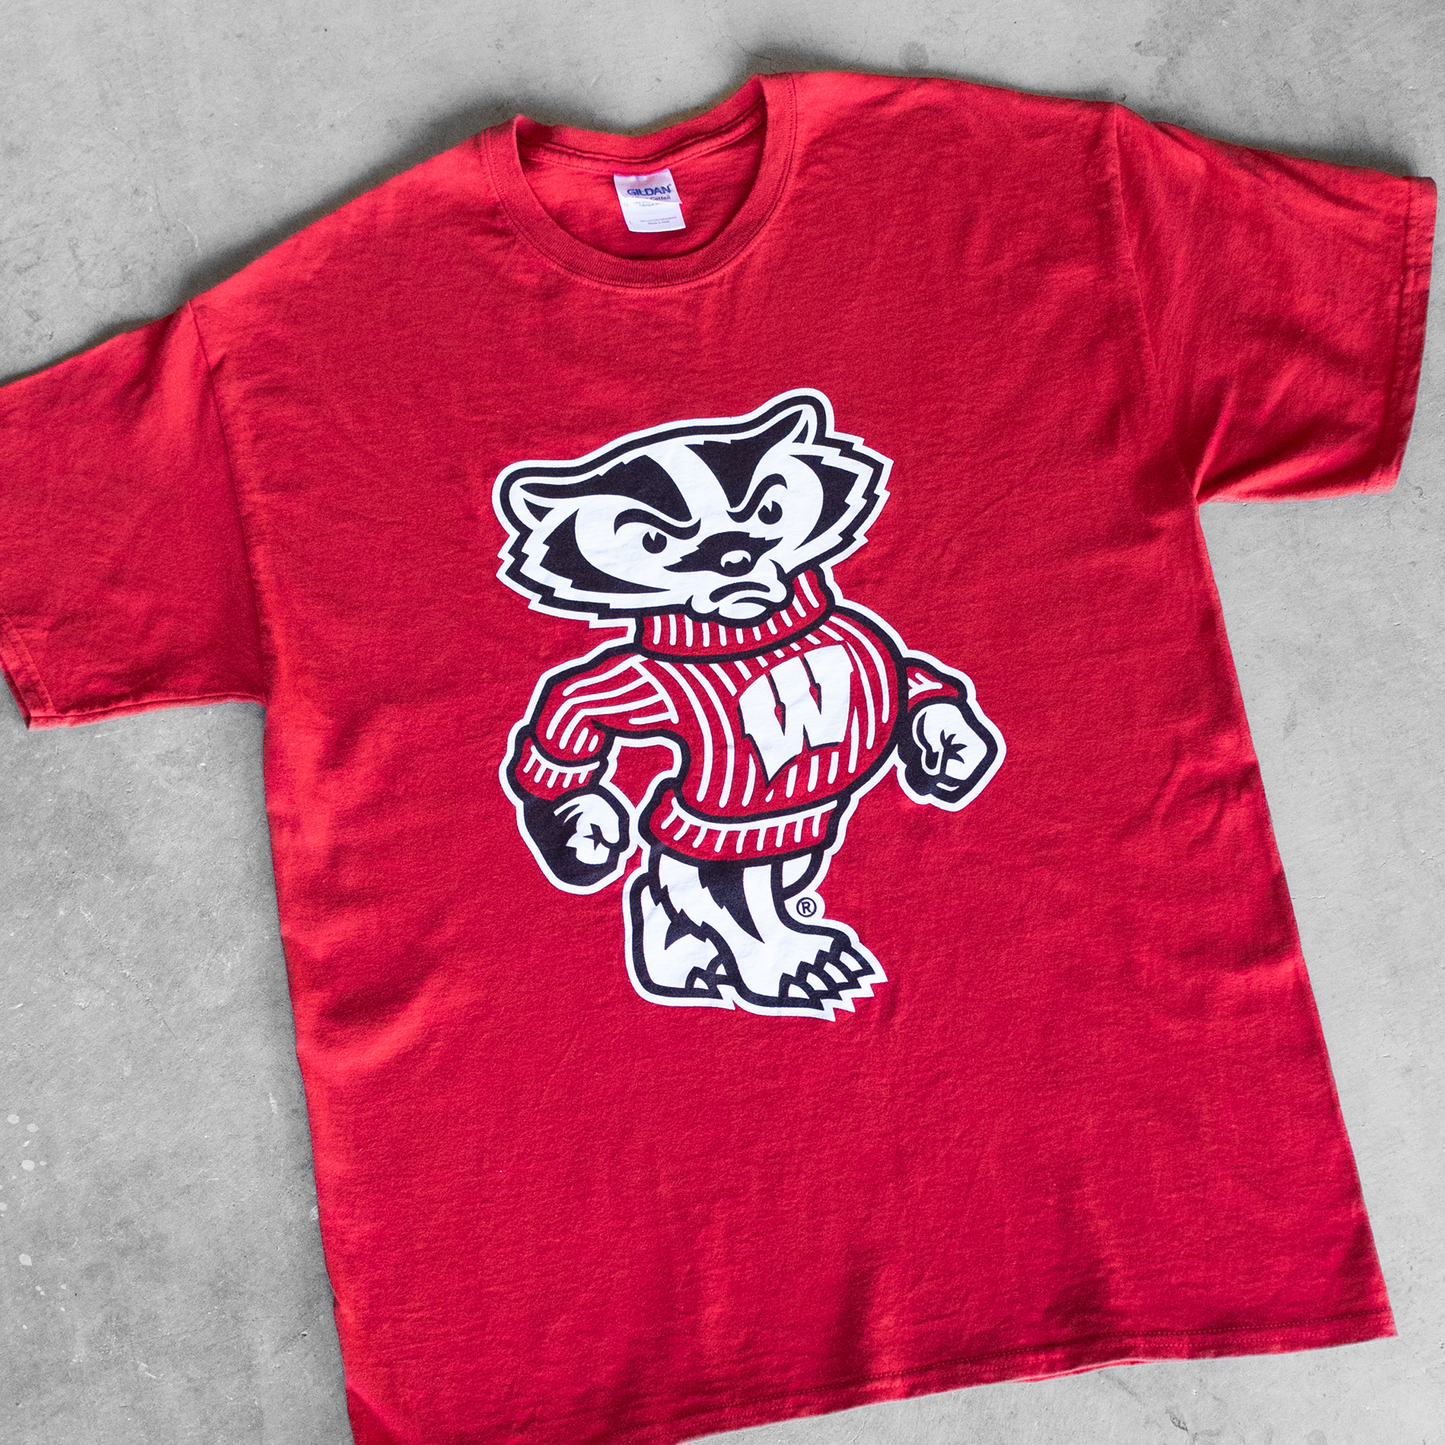 Vintage University Of Wisconsin Badgers Mascot Graphic T-Shirt (L)